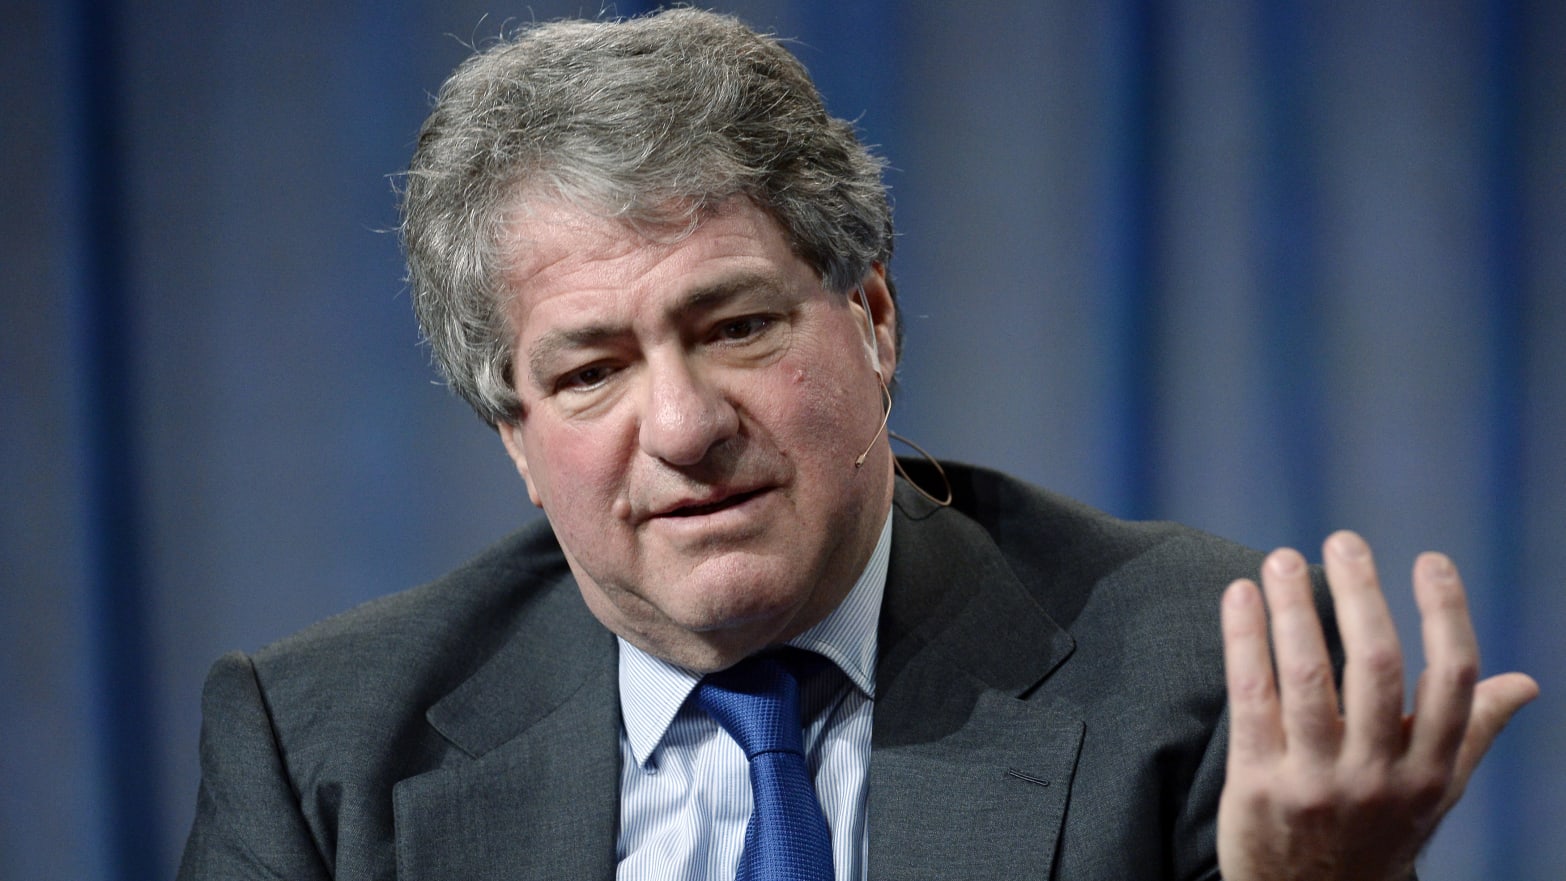 Leon Black Accused of Raping 16-Year-Old With Down Syndrome image